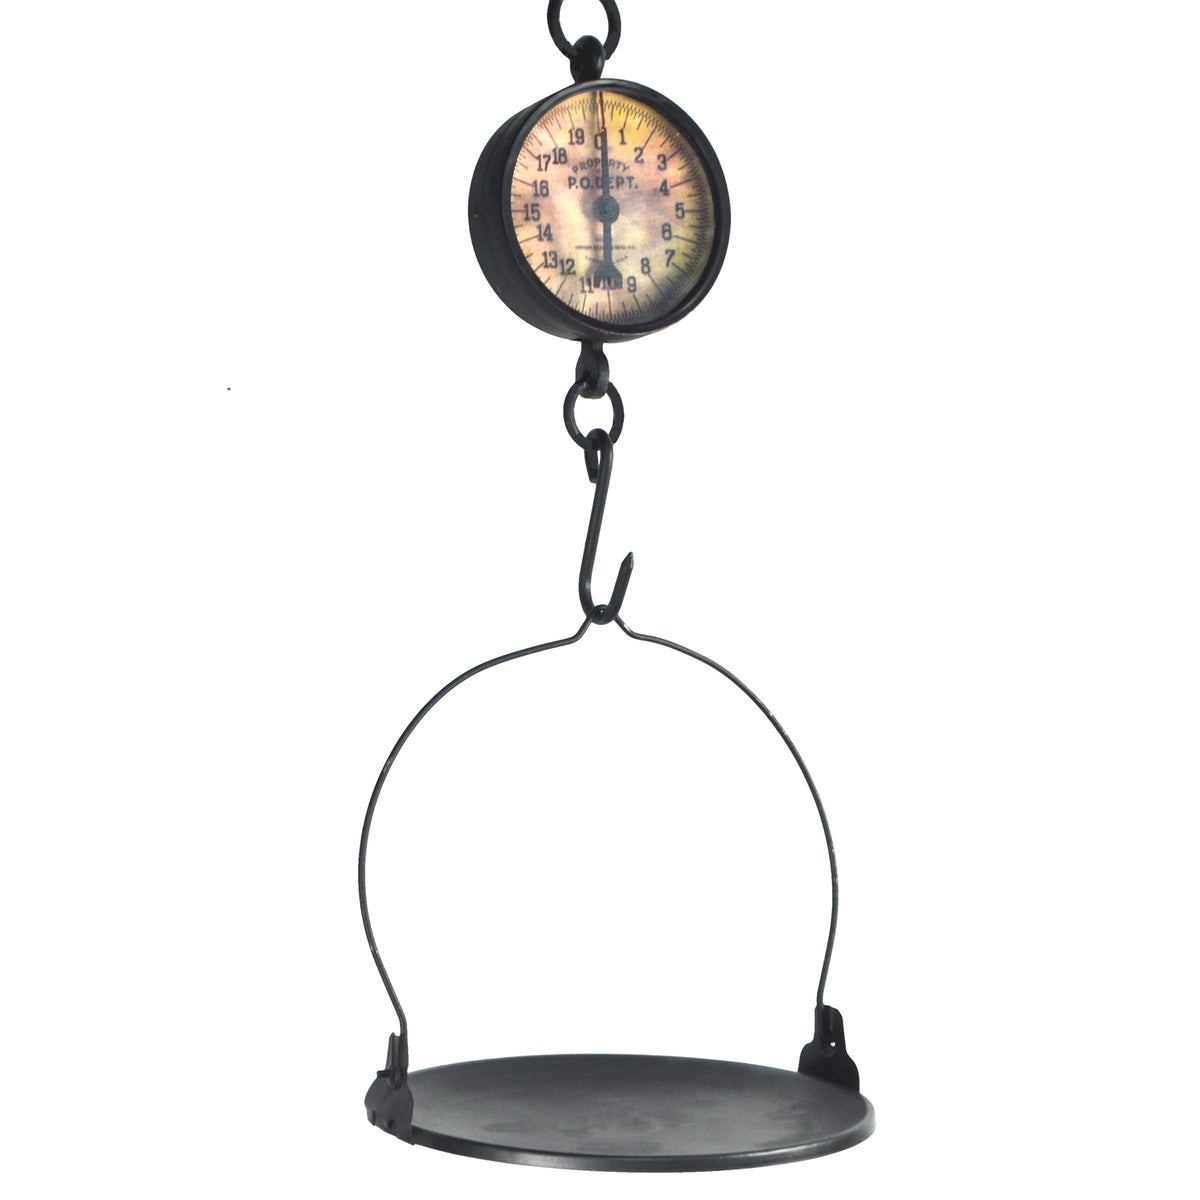 Front Dial Hanging Scale